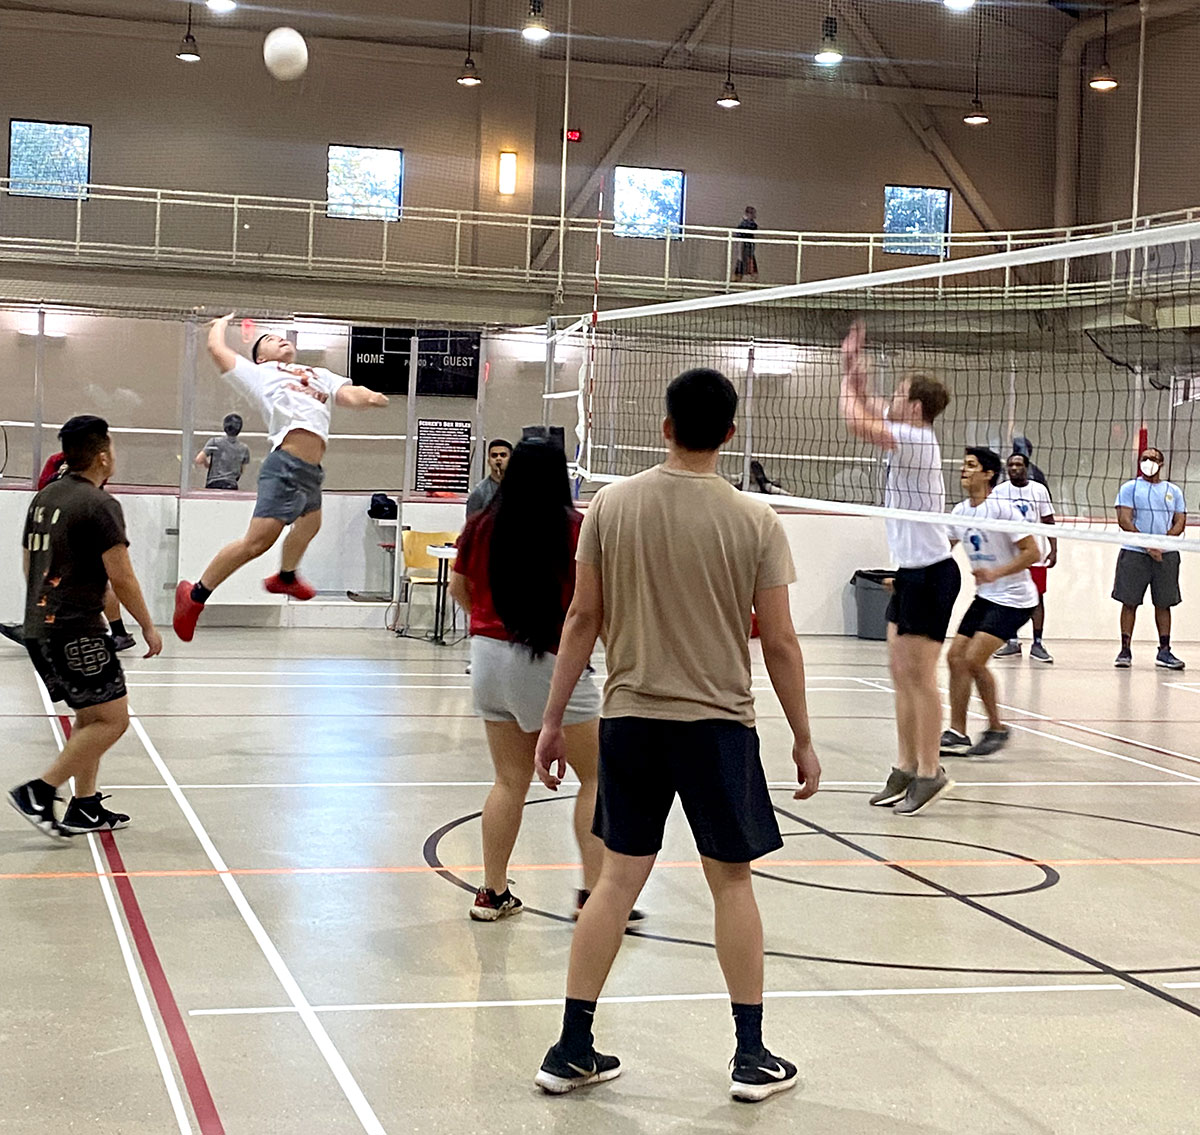 Jimmy Trinh, of team Gremlins, rises to spike the ball during the Co-Rec volleyball tournament, Feb. 28, in the Sheila Umphrey Recreational Sports Center. UP photo by Clarissa Hernandez